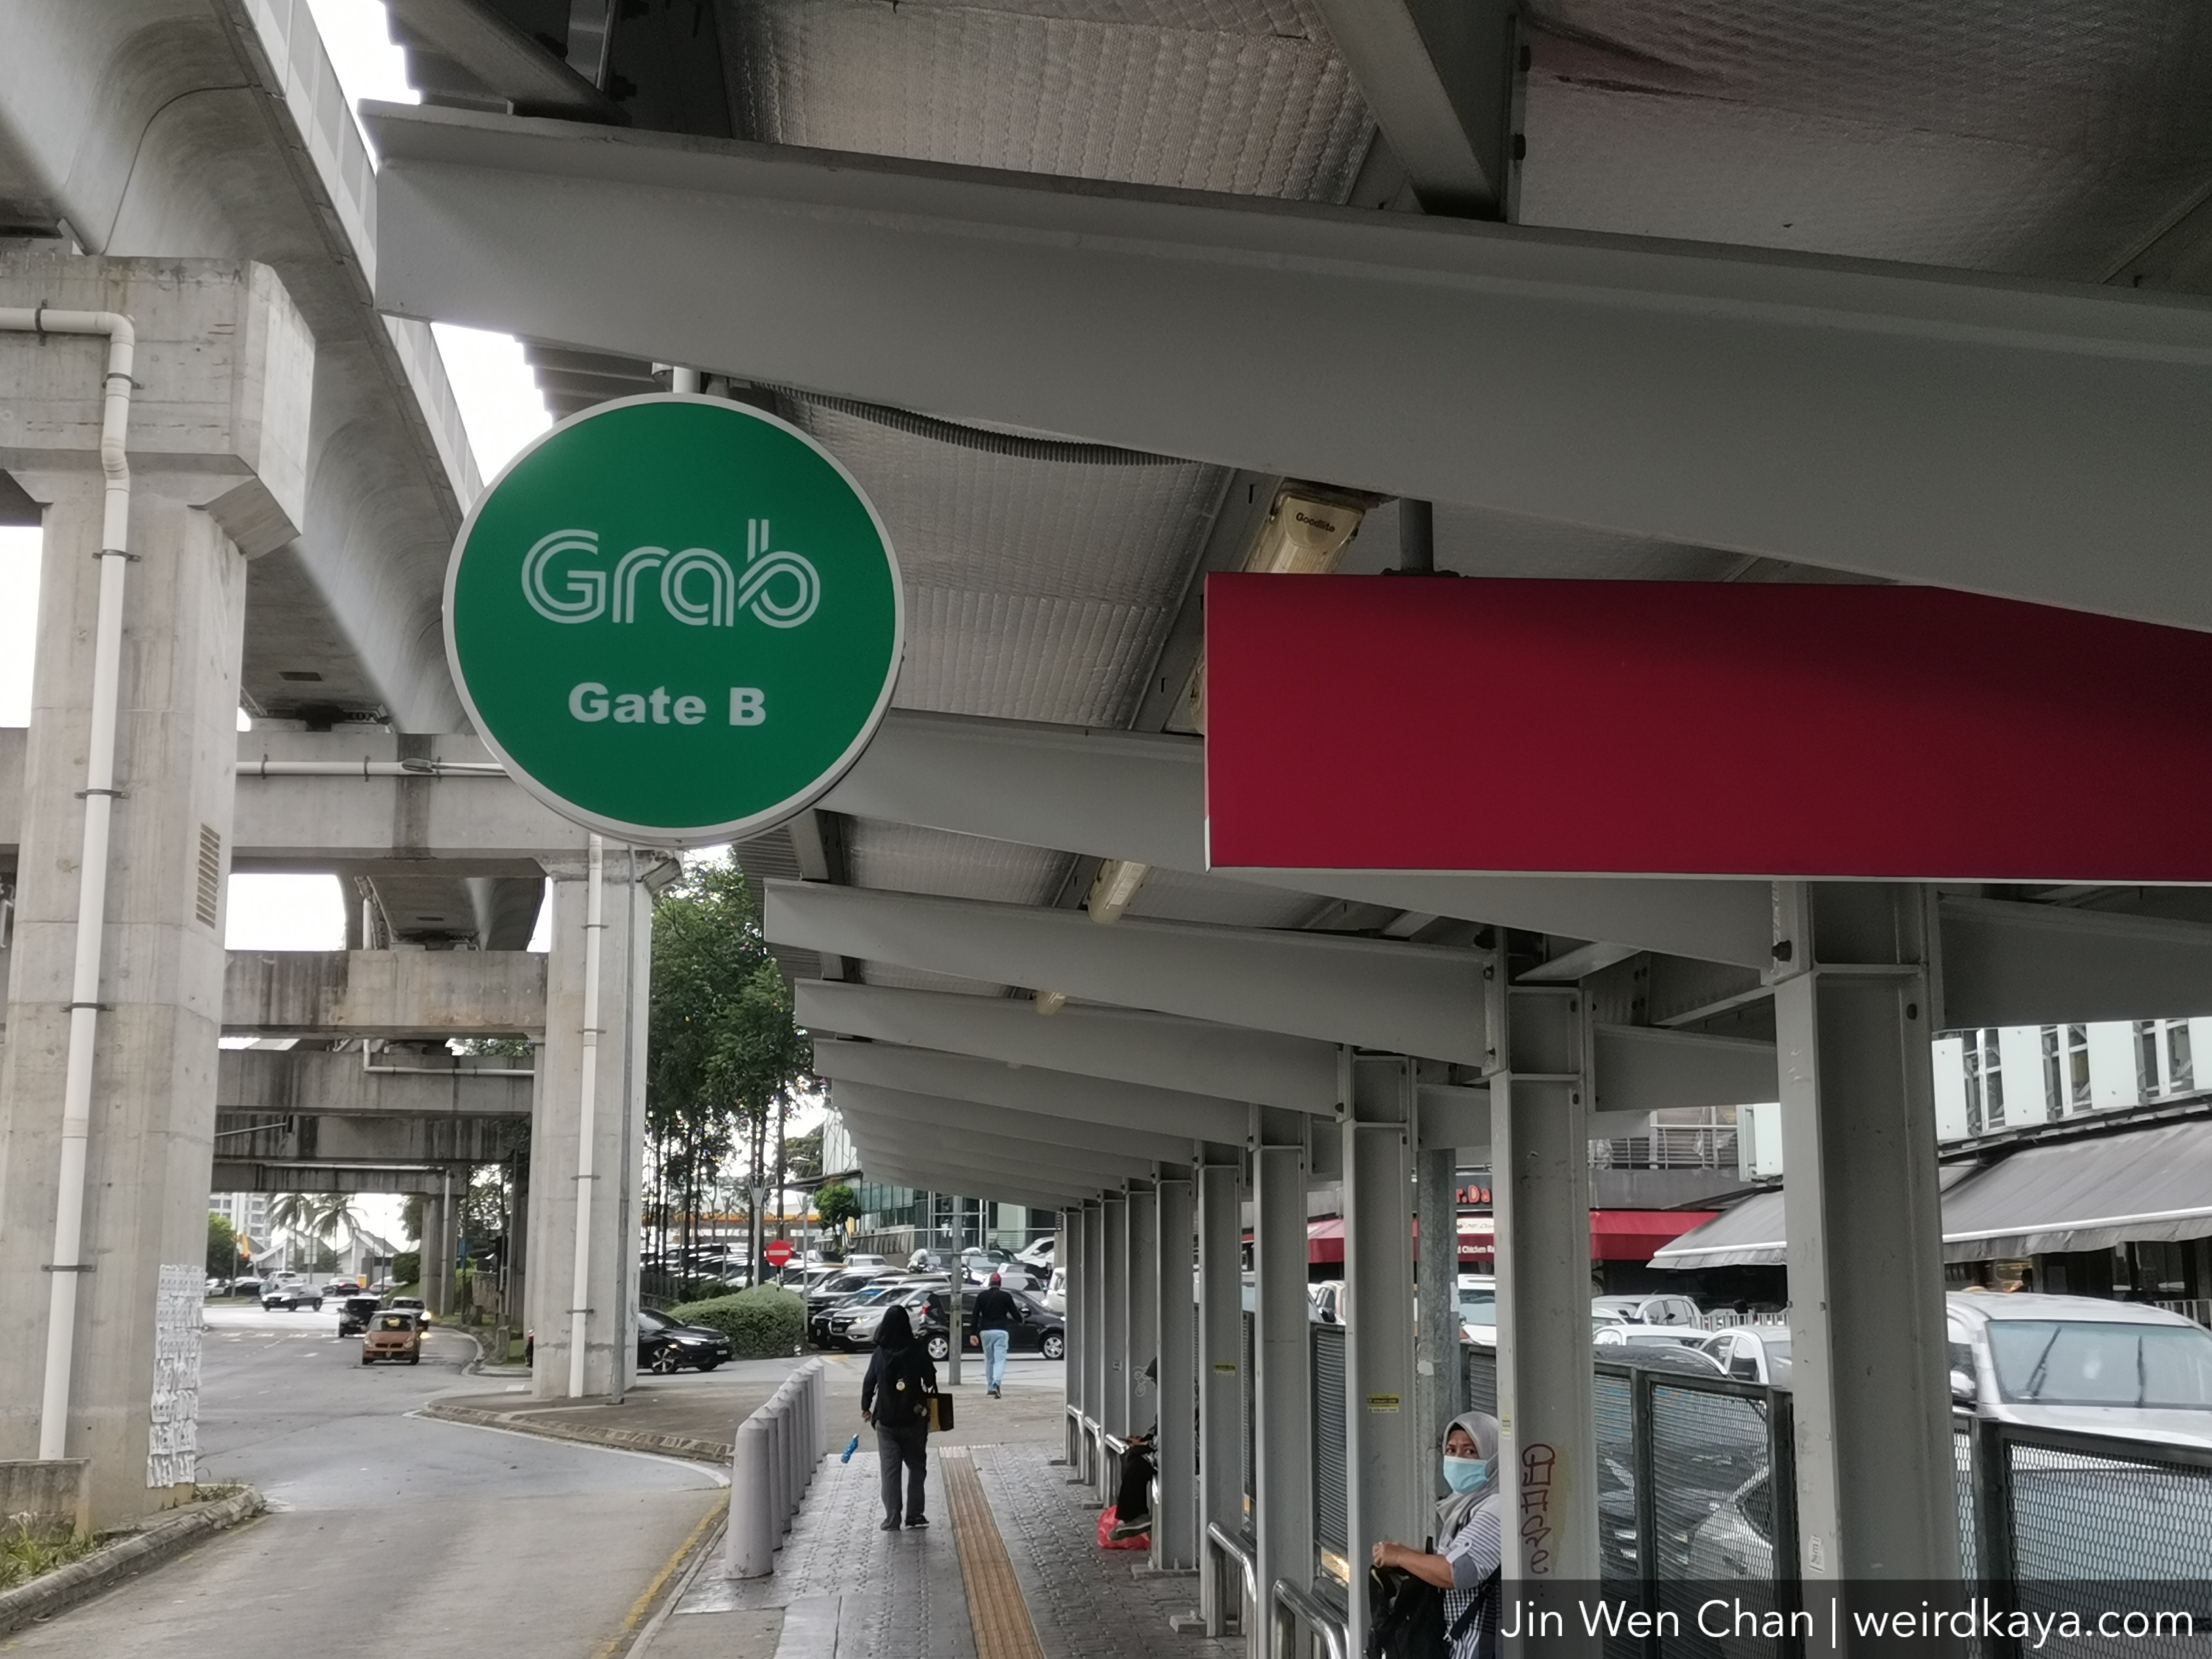 A grab sign in kl